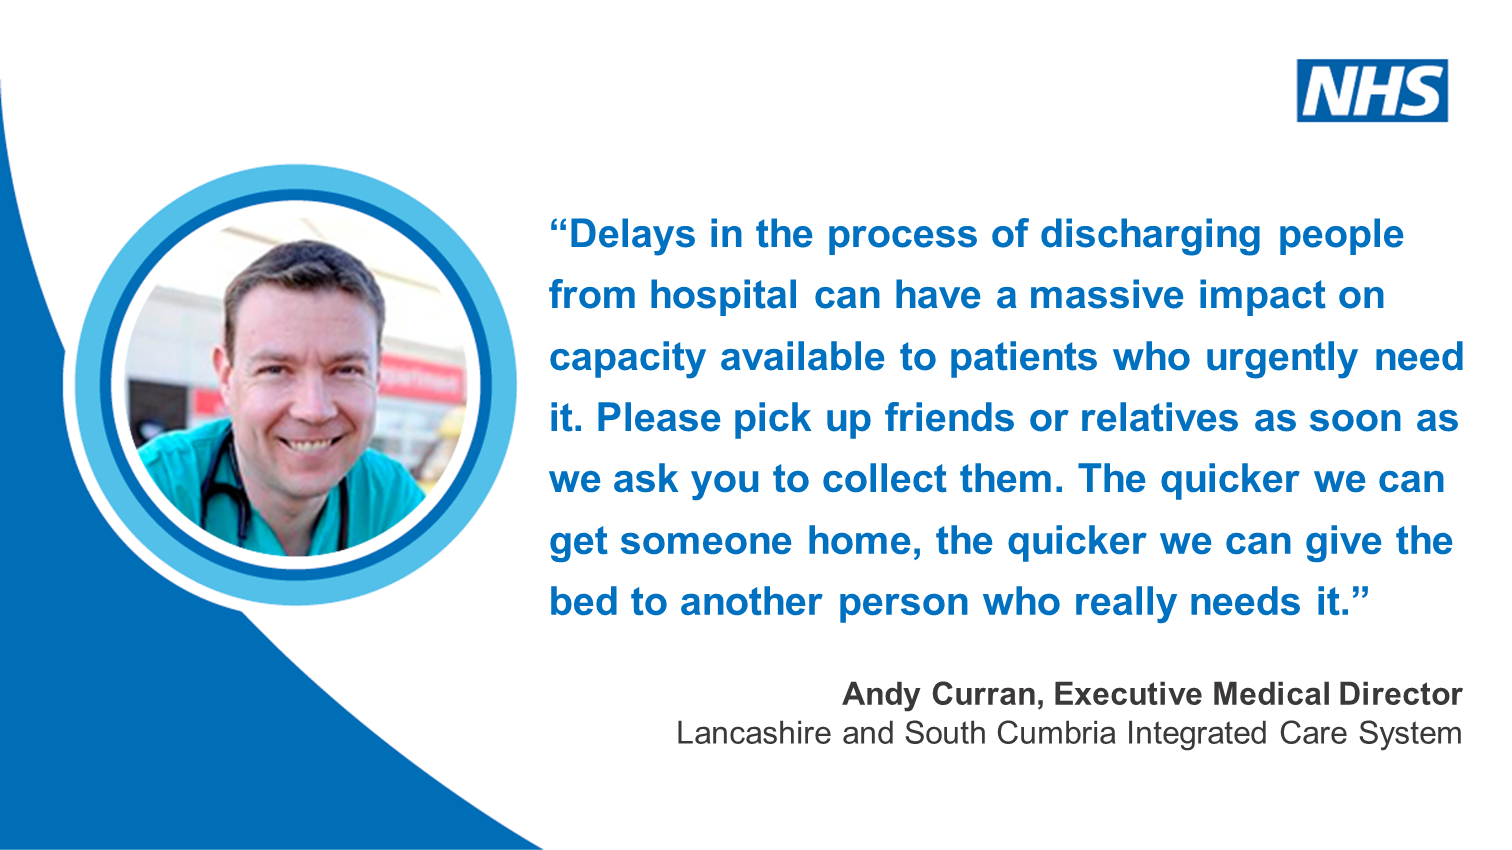 NHS plea for support to get people home from hospital